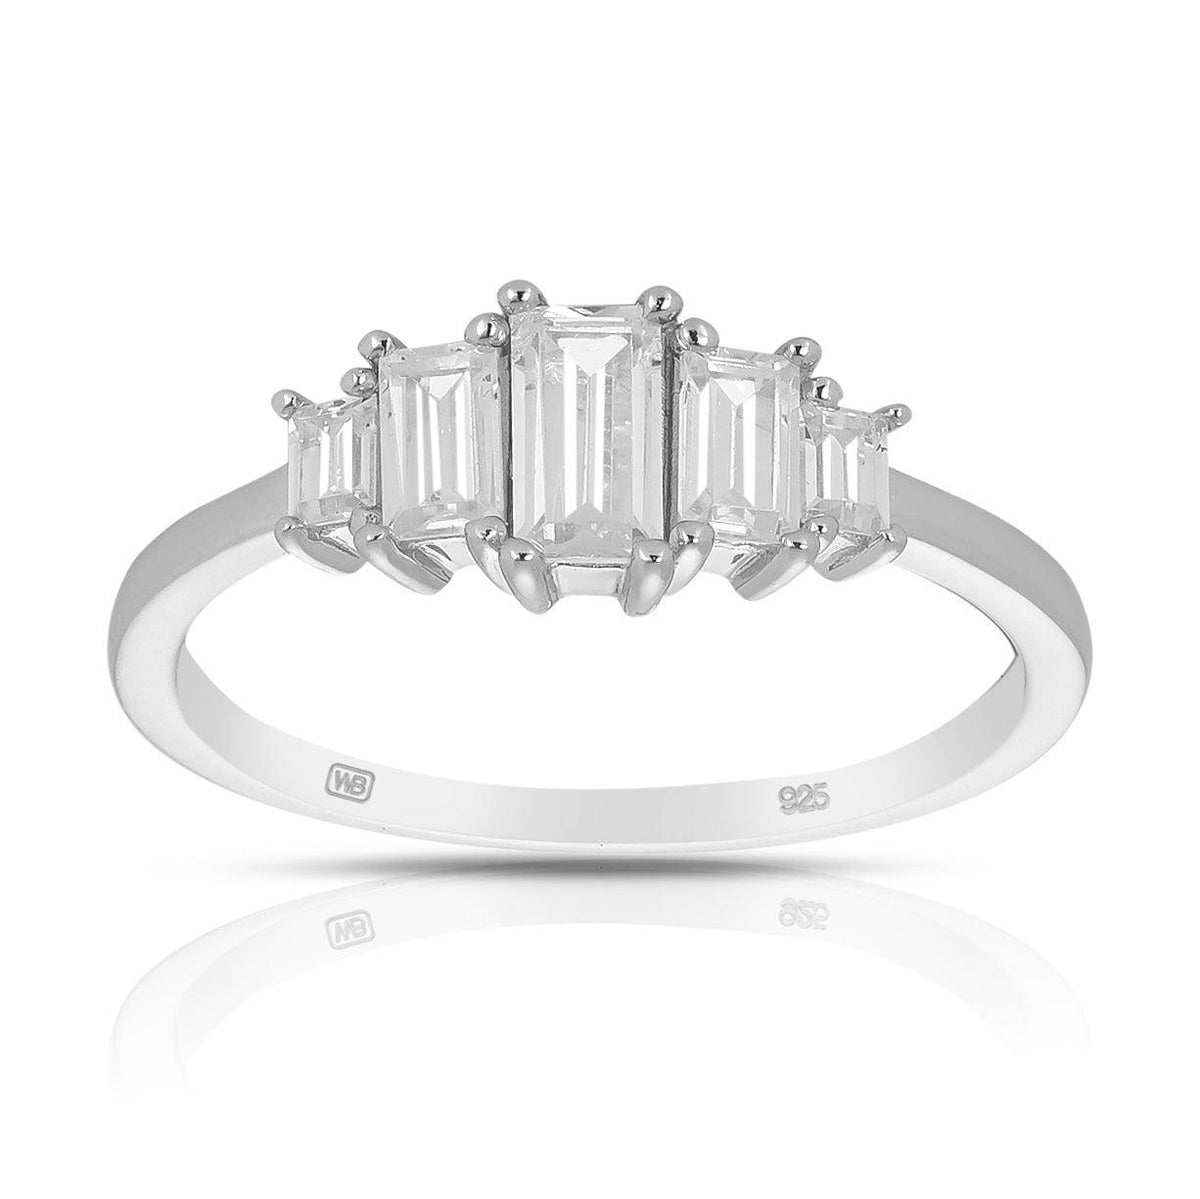 Graduated Cubic Zirconia Ring in Sterling Silver - Wallace Bishop